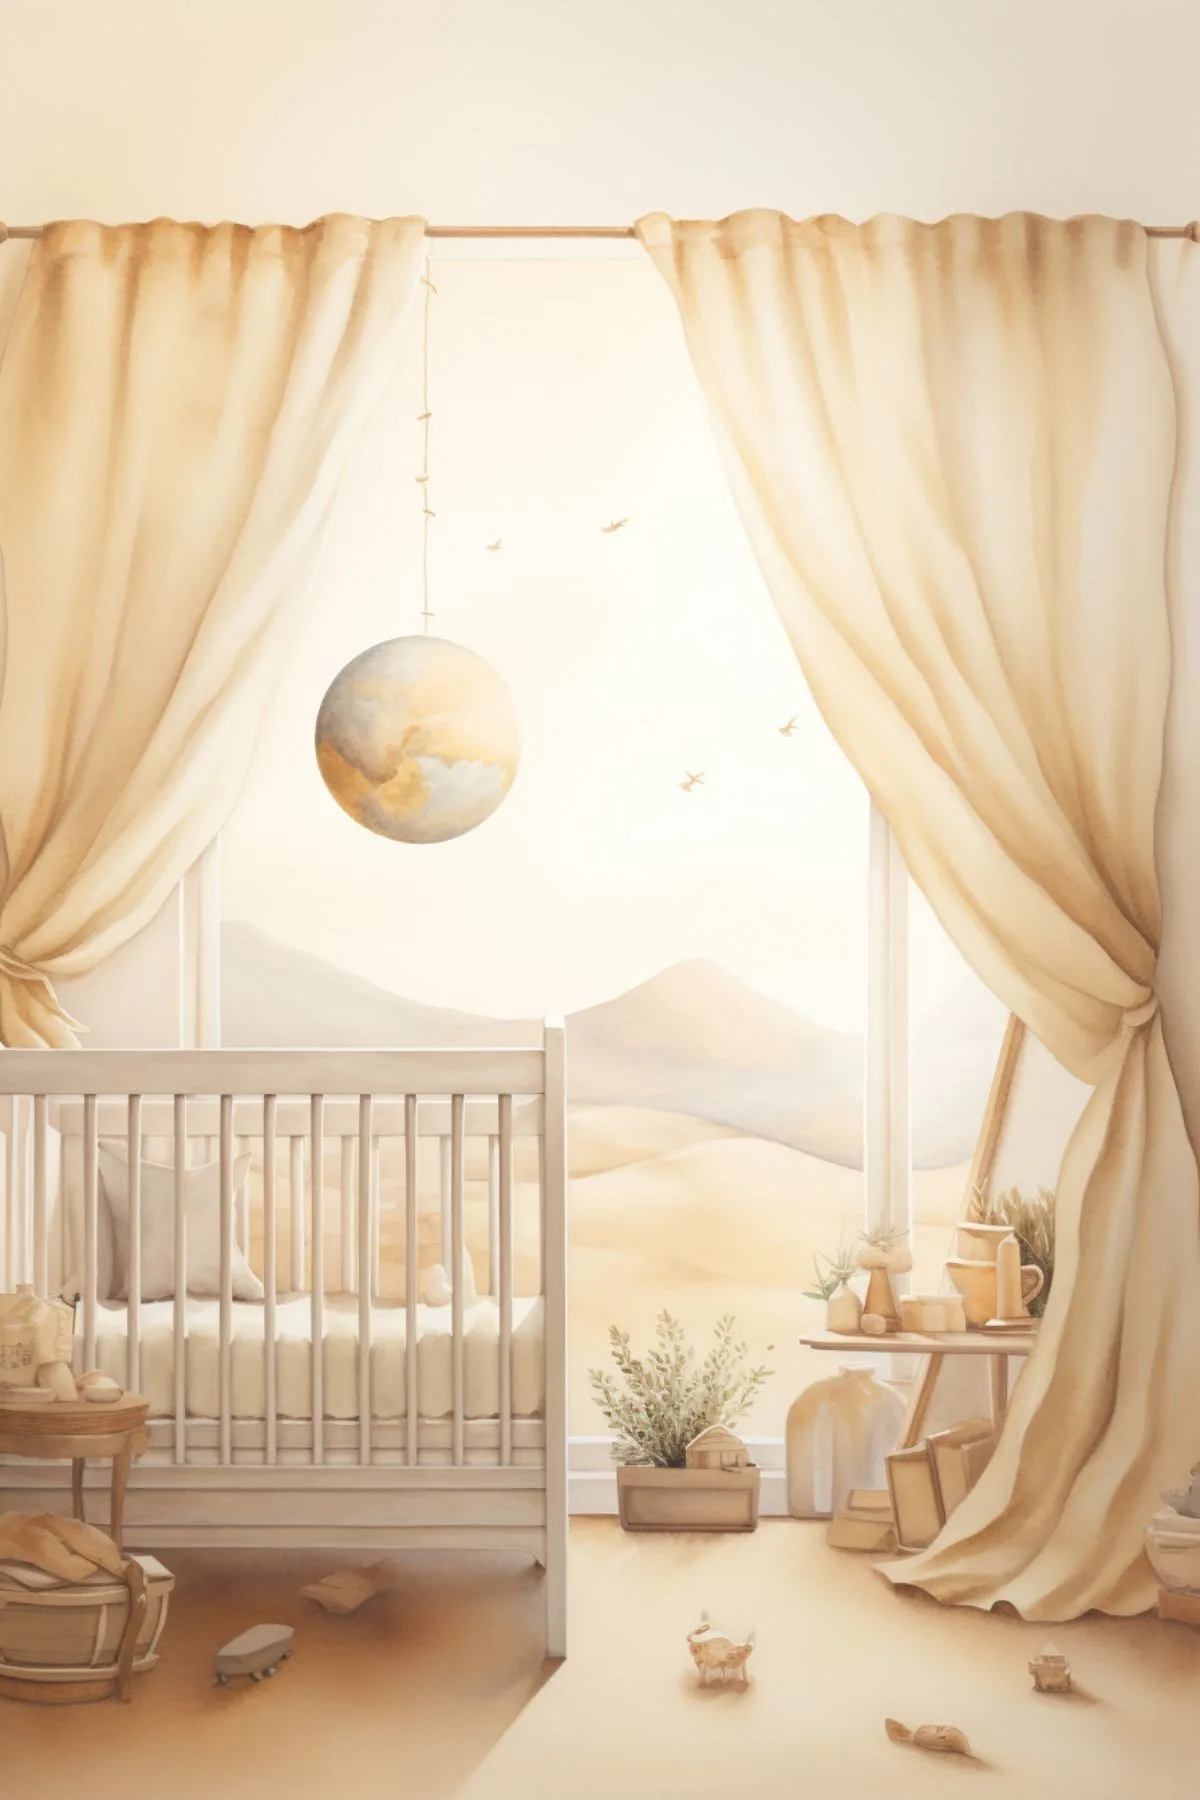 Cover image for baby bible verses features a crib against a window